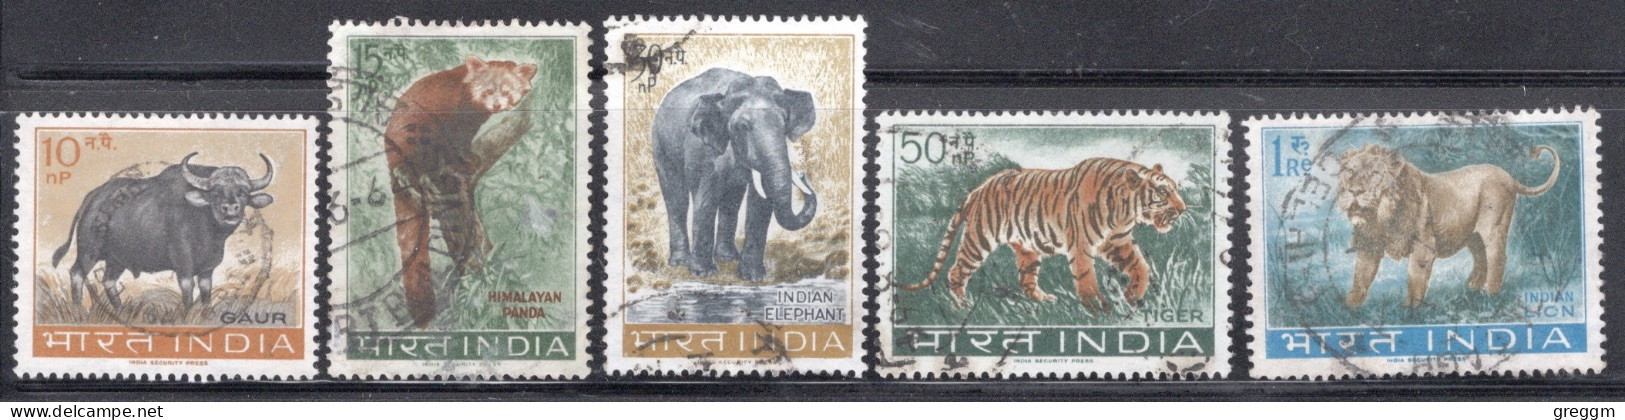 India 1963 Set Of Stamps To Celebrate Wildlife Conservation In Fine Used - Used Stamps